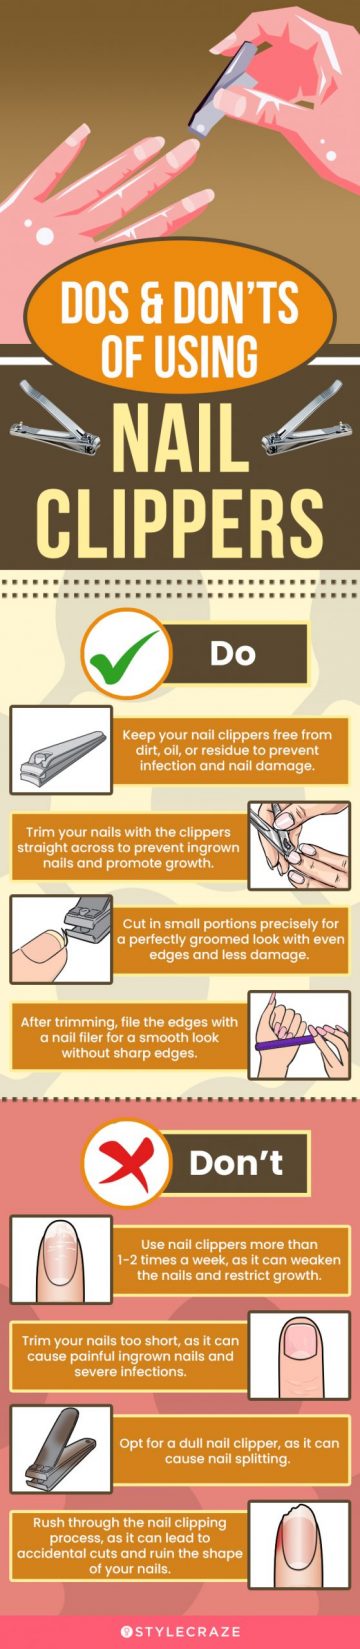 Dos & Don’ts Of Using Nail Clippers(infographic)